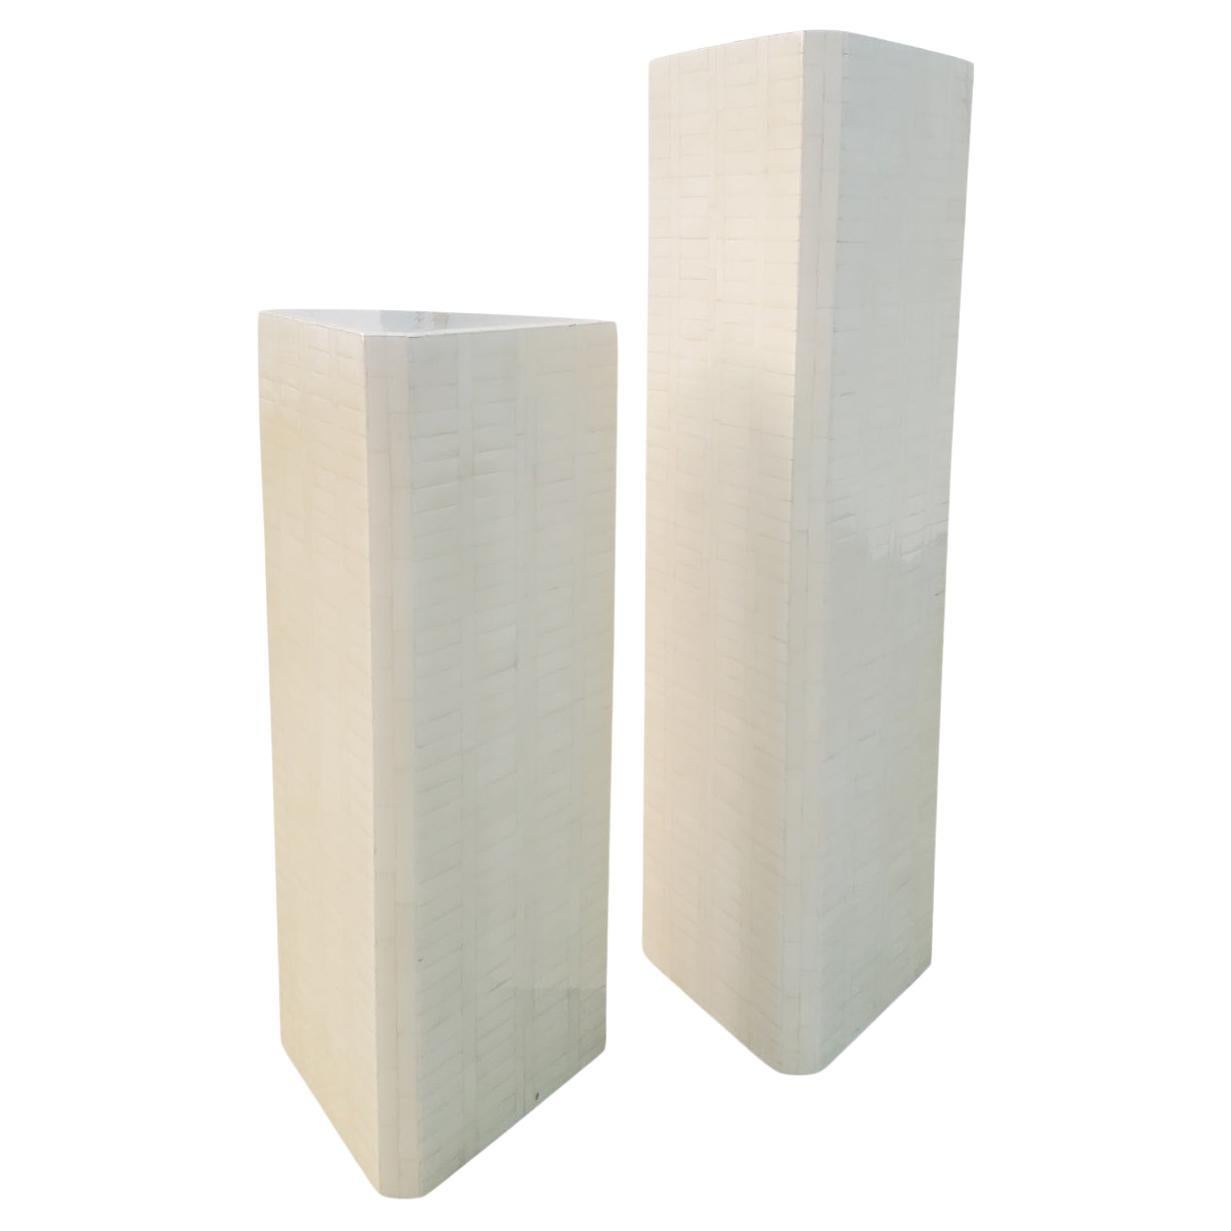 Pair of Enrique Garcel Tessellated Bone Tiered Pedestals  For Sale